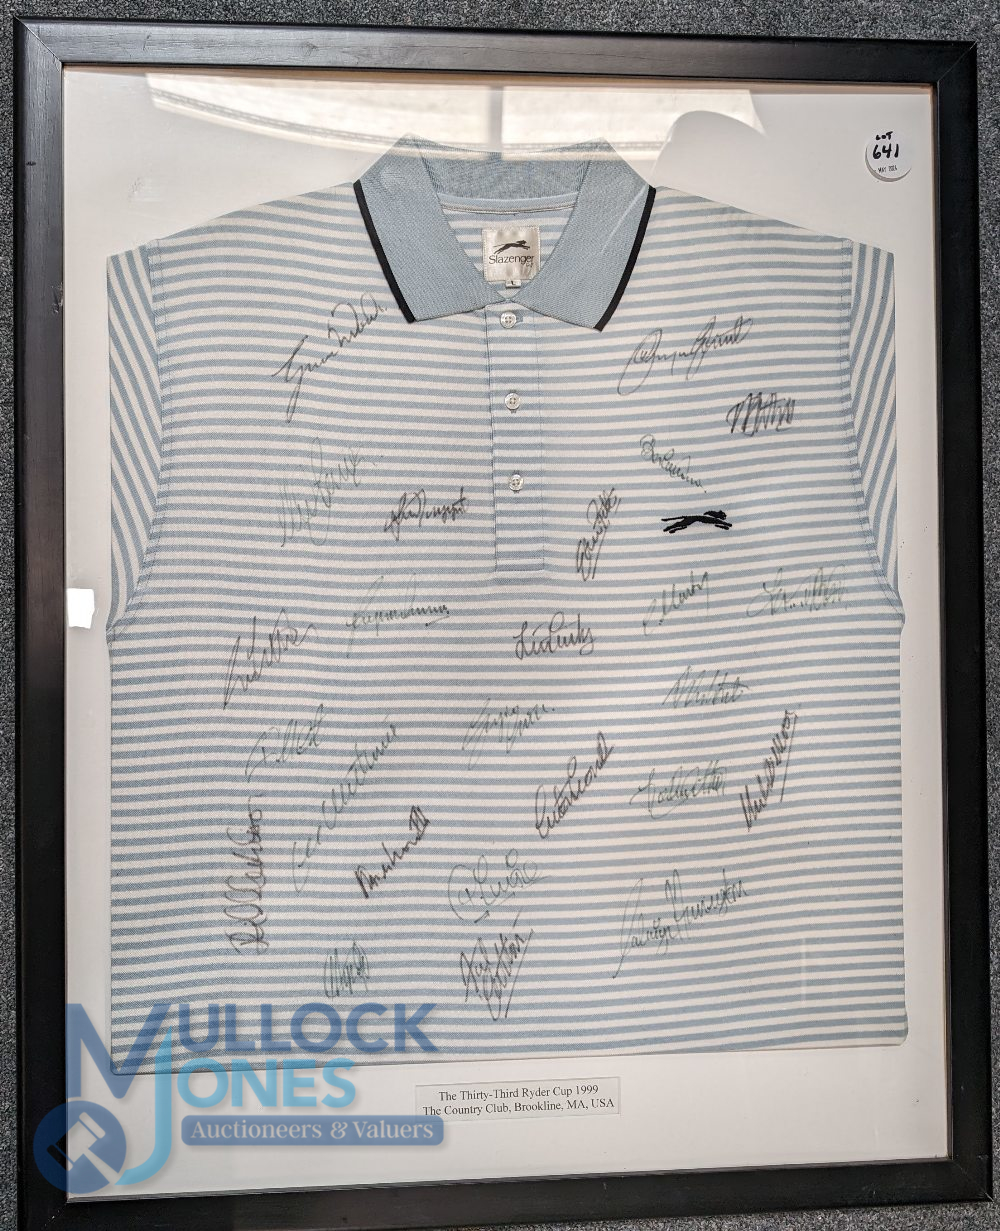 Golf Autographs - multi-signed 1999 Ryder Cup Golf framed T-Shirt - featuring the European and - Image 2 of 3